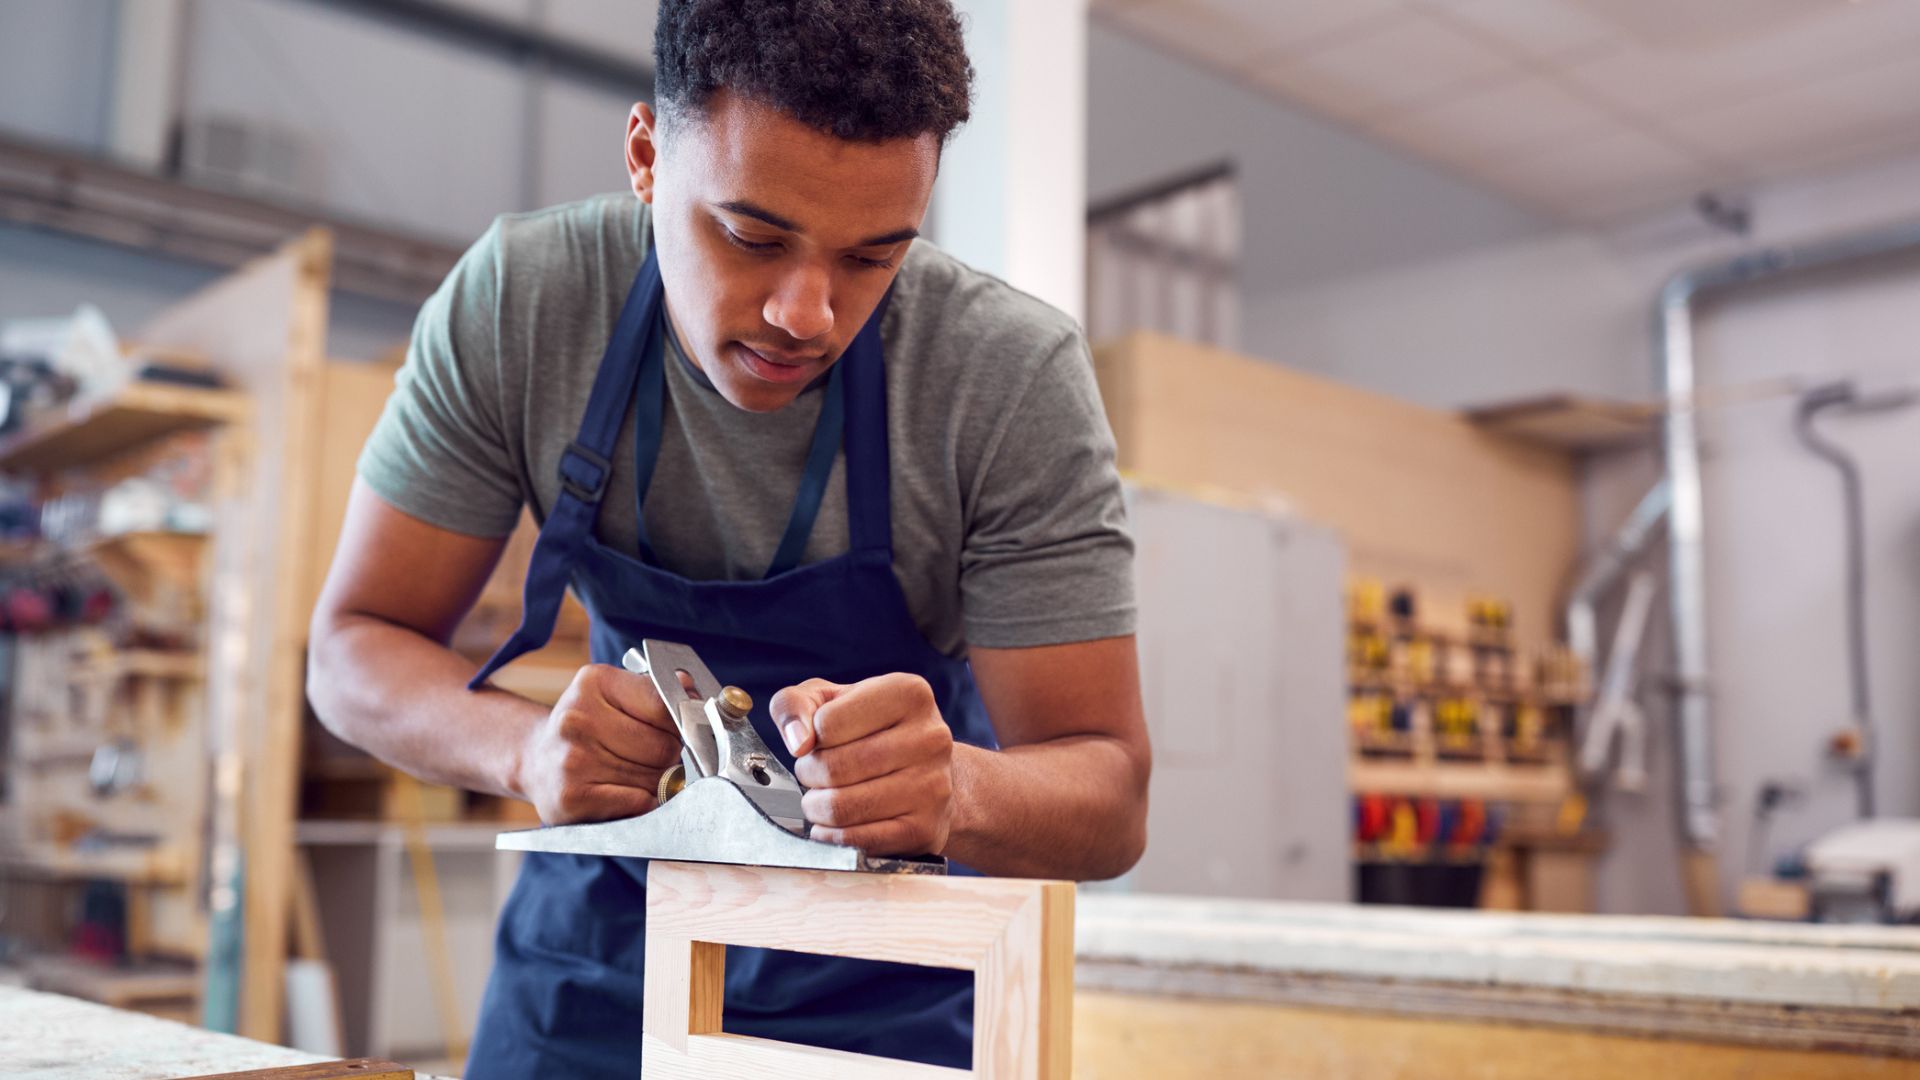 5 Advantages of Attending a Skilled Trade School in Florida